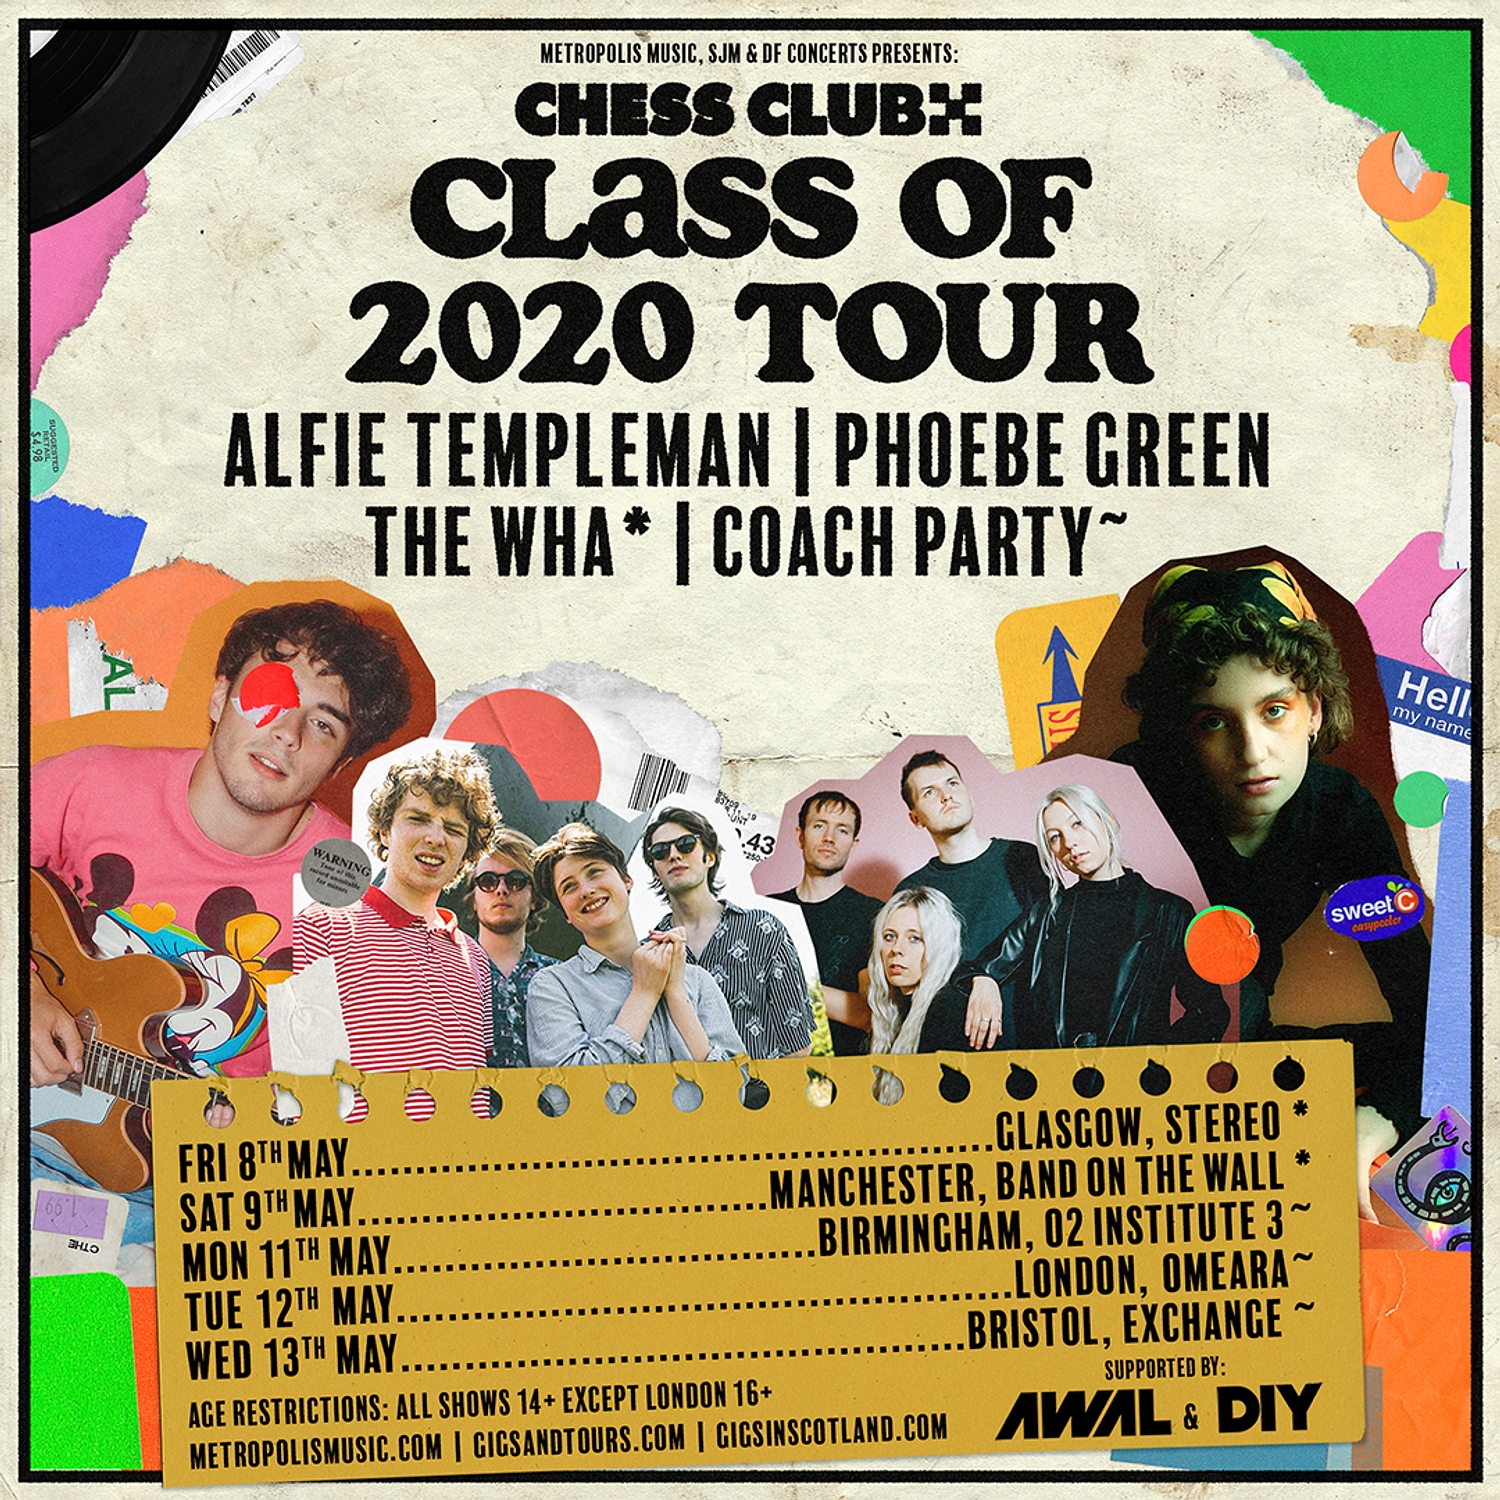 Alfie Templeman, Phoebe Green, Coach Party and The Wha announced for Chess Club Records tour